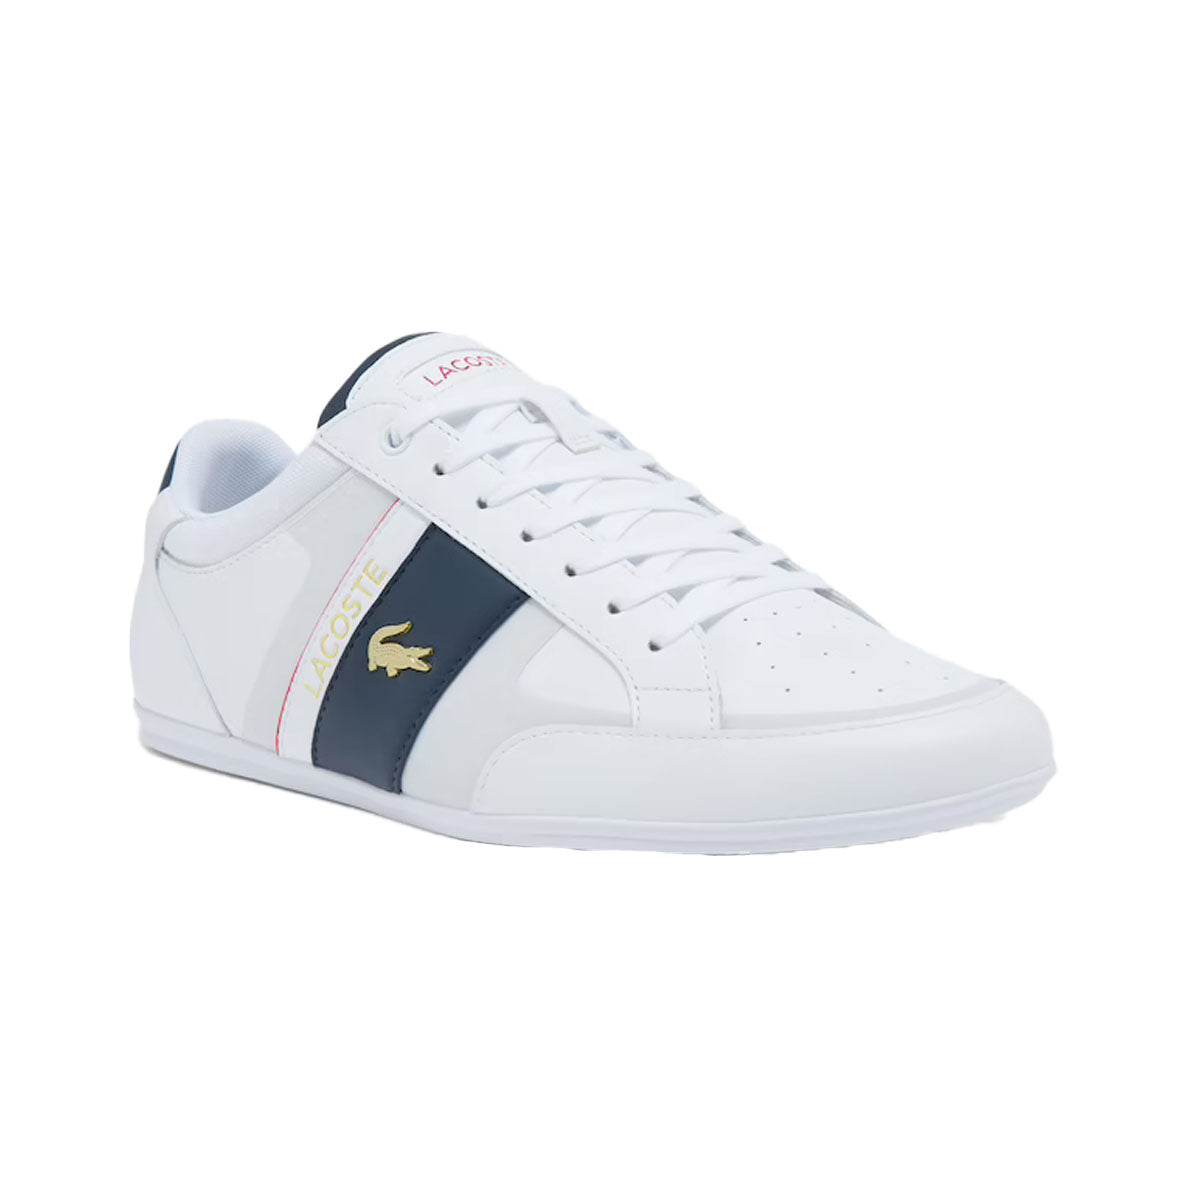 Lacoste Carnaby EVO BL 1 Men's Leather Lace-up Casual Sneakers 33SPM1002003  - Walmart.com